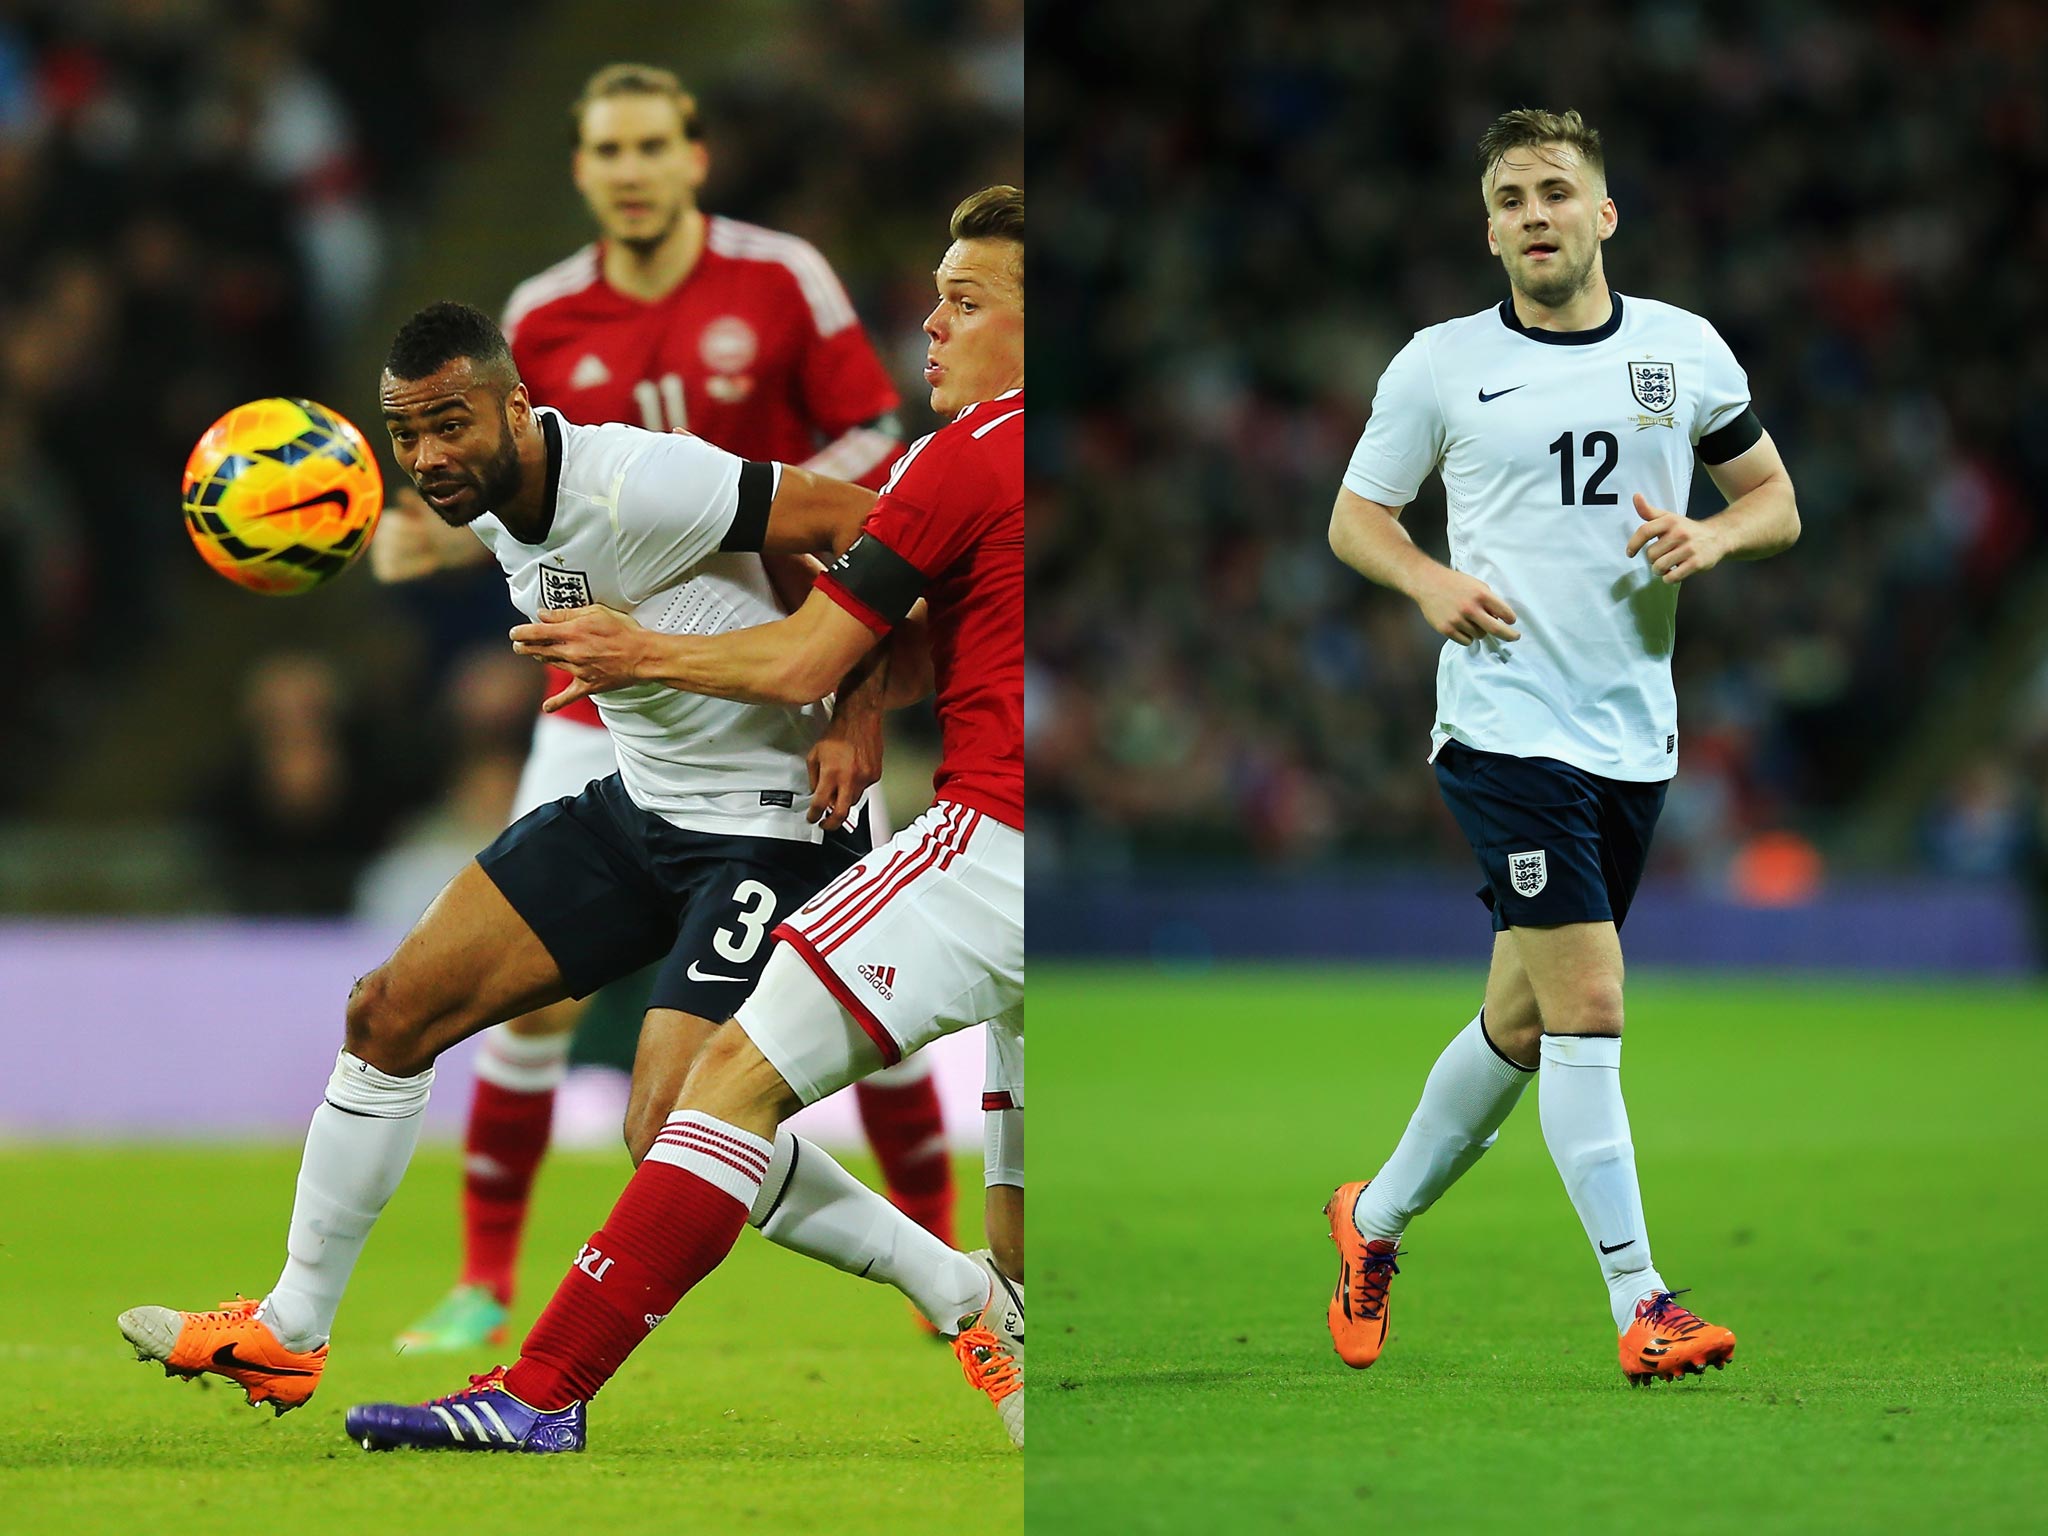 Ashley Cole and Luke shaw both put in solid performances for England in the 1-0 victory over Denmark